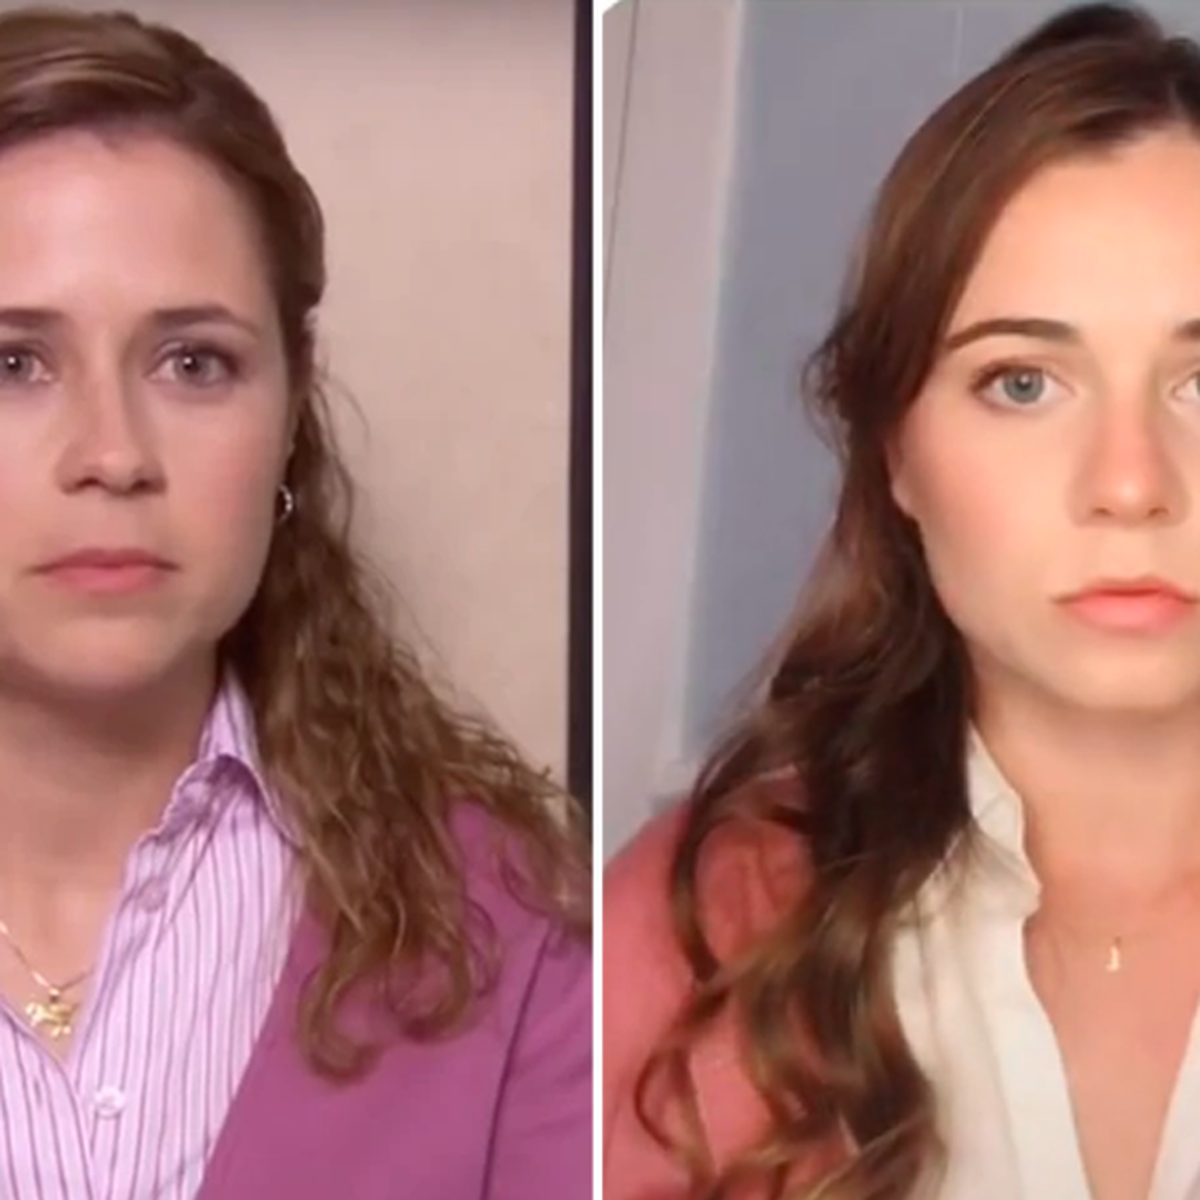 This TikTok star looks exactly like Pam Beesly from The Office - 9Celebrity